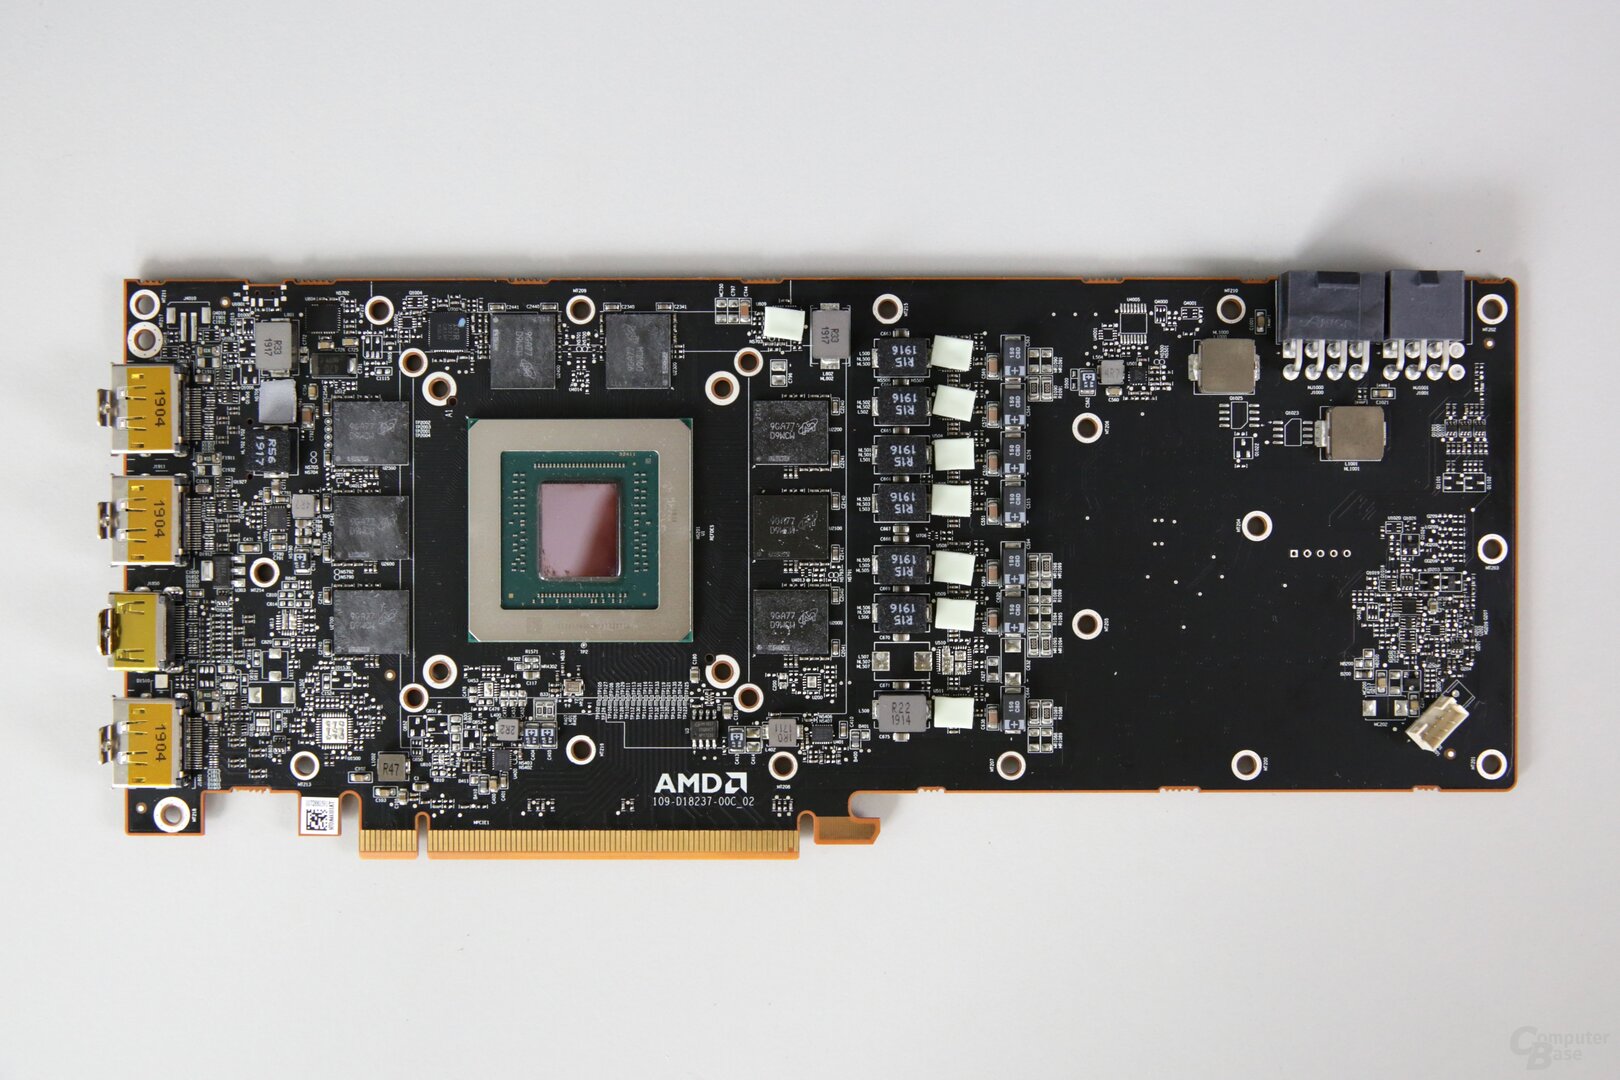 The Radeon RX 5700 (XT) PCB with Navi 10 and 8 GB GDDR6